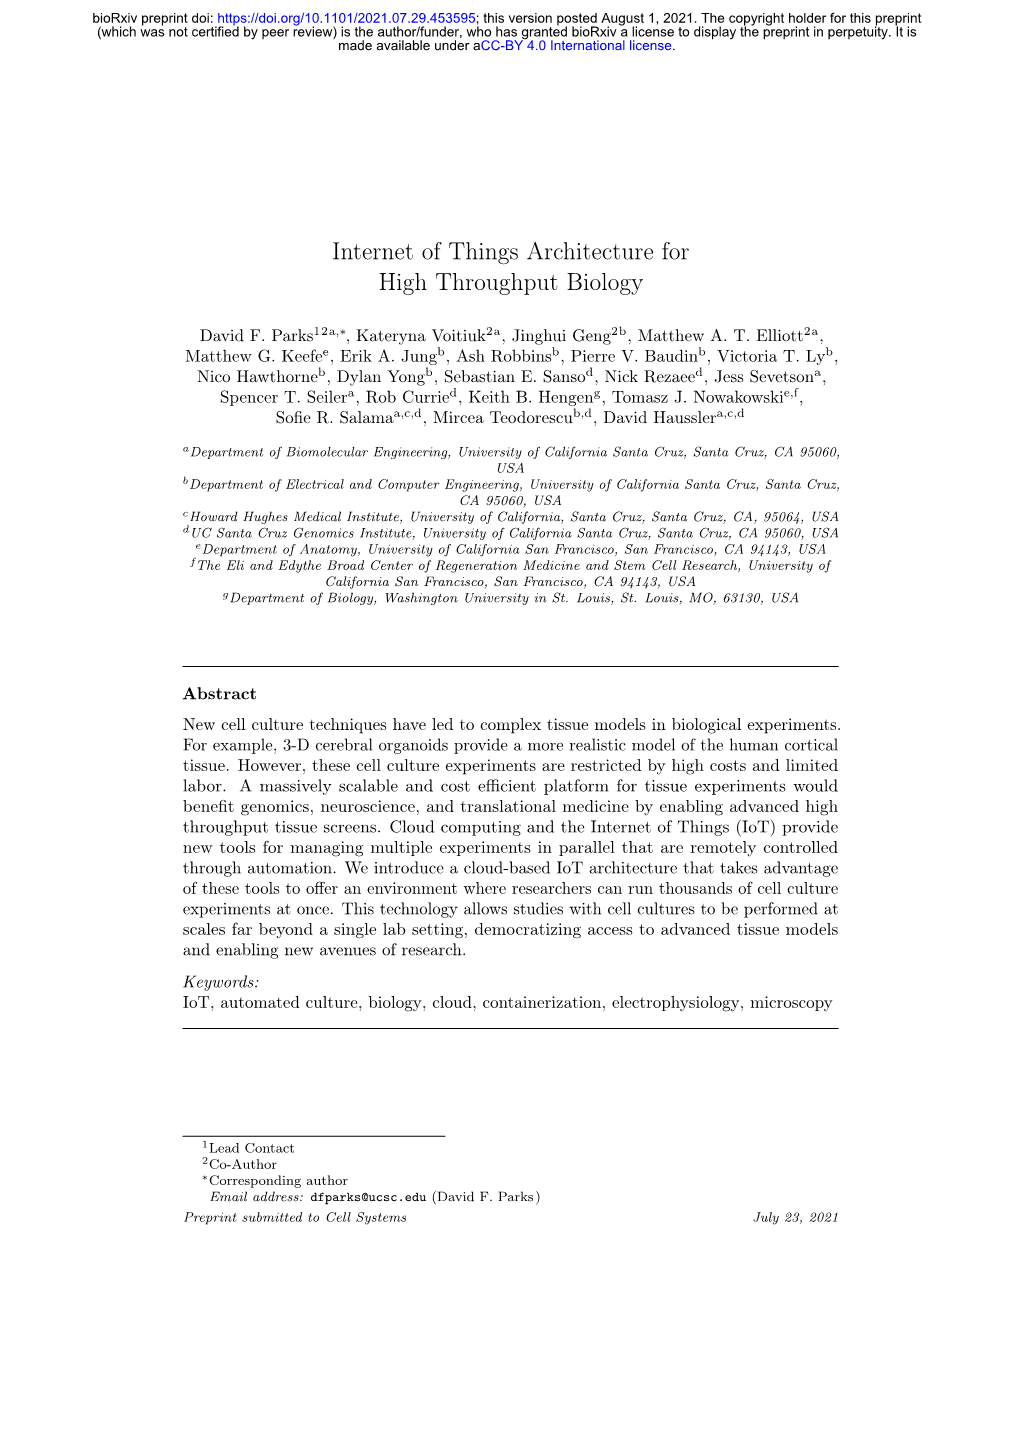 Internet of Things Architecture for High Throughput Biology